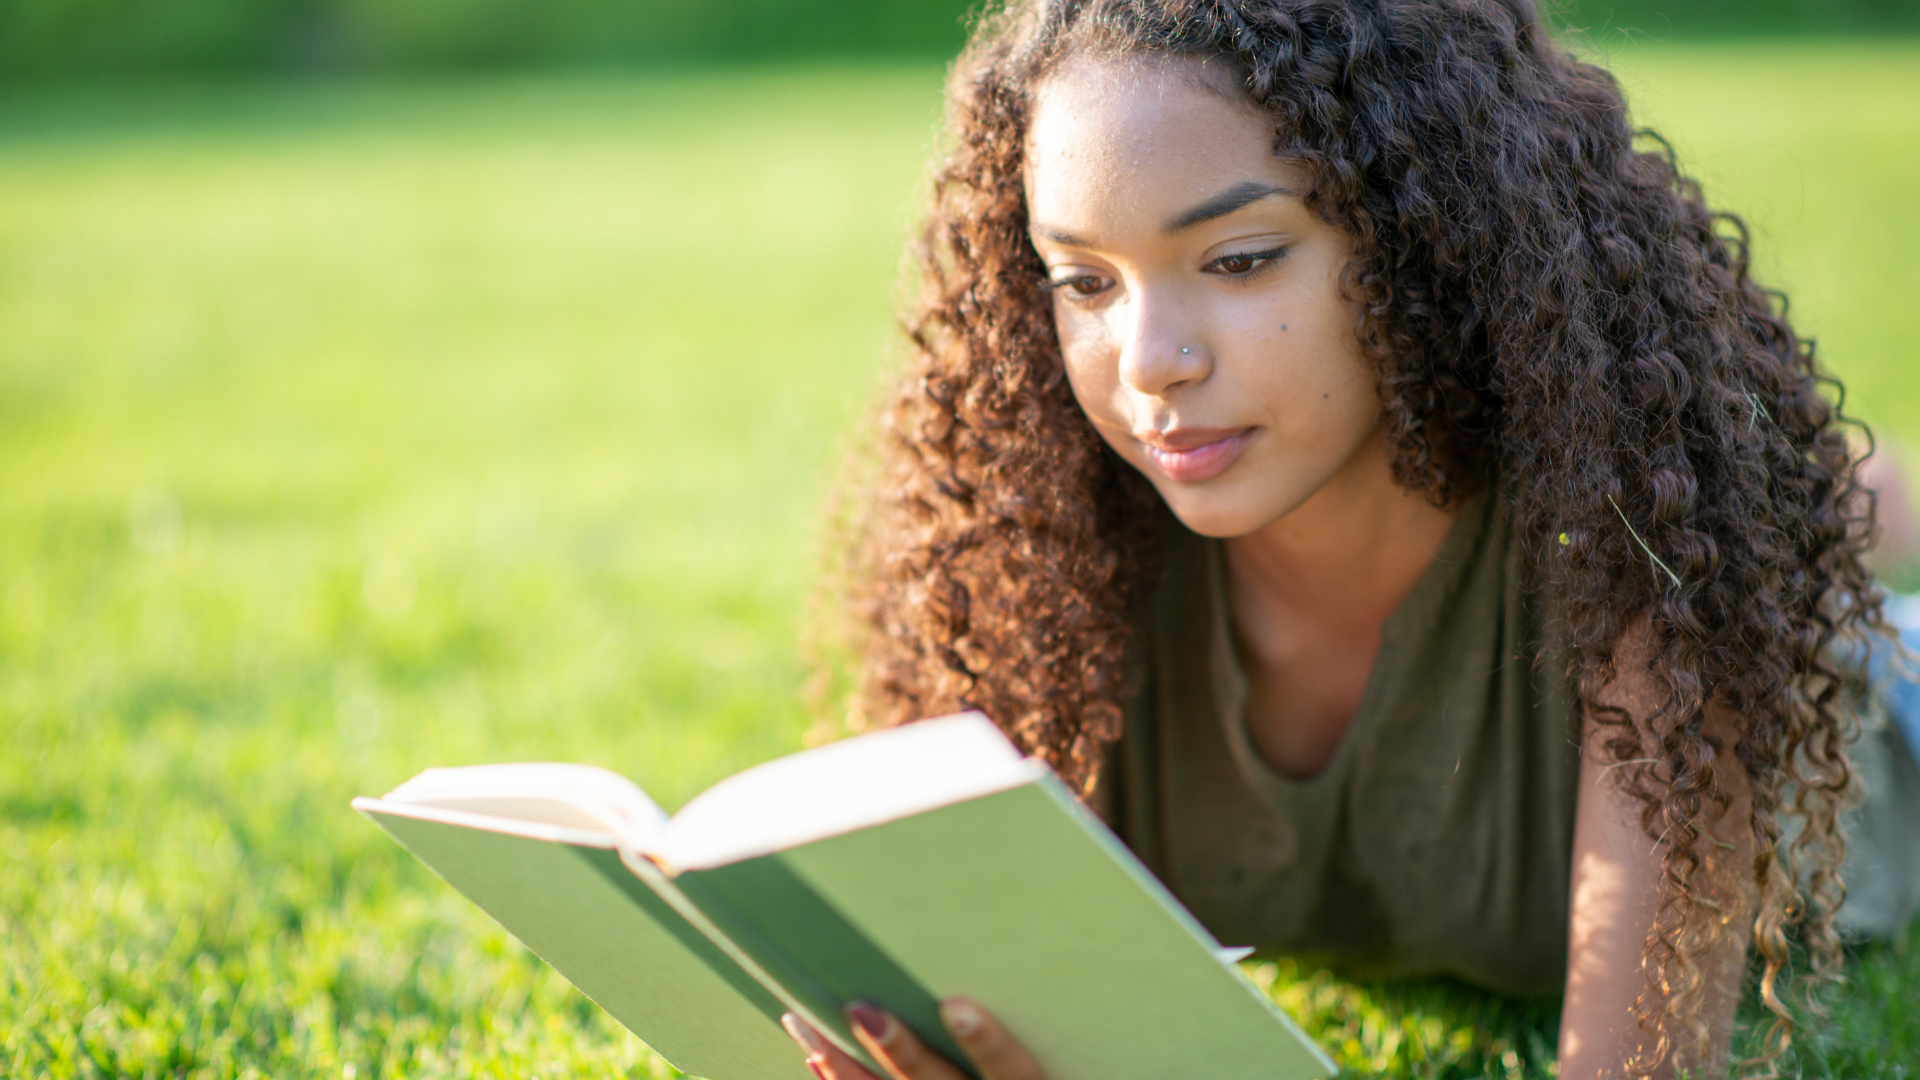 young-woman-reading-outside-in-the-grass-summertime